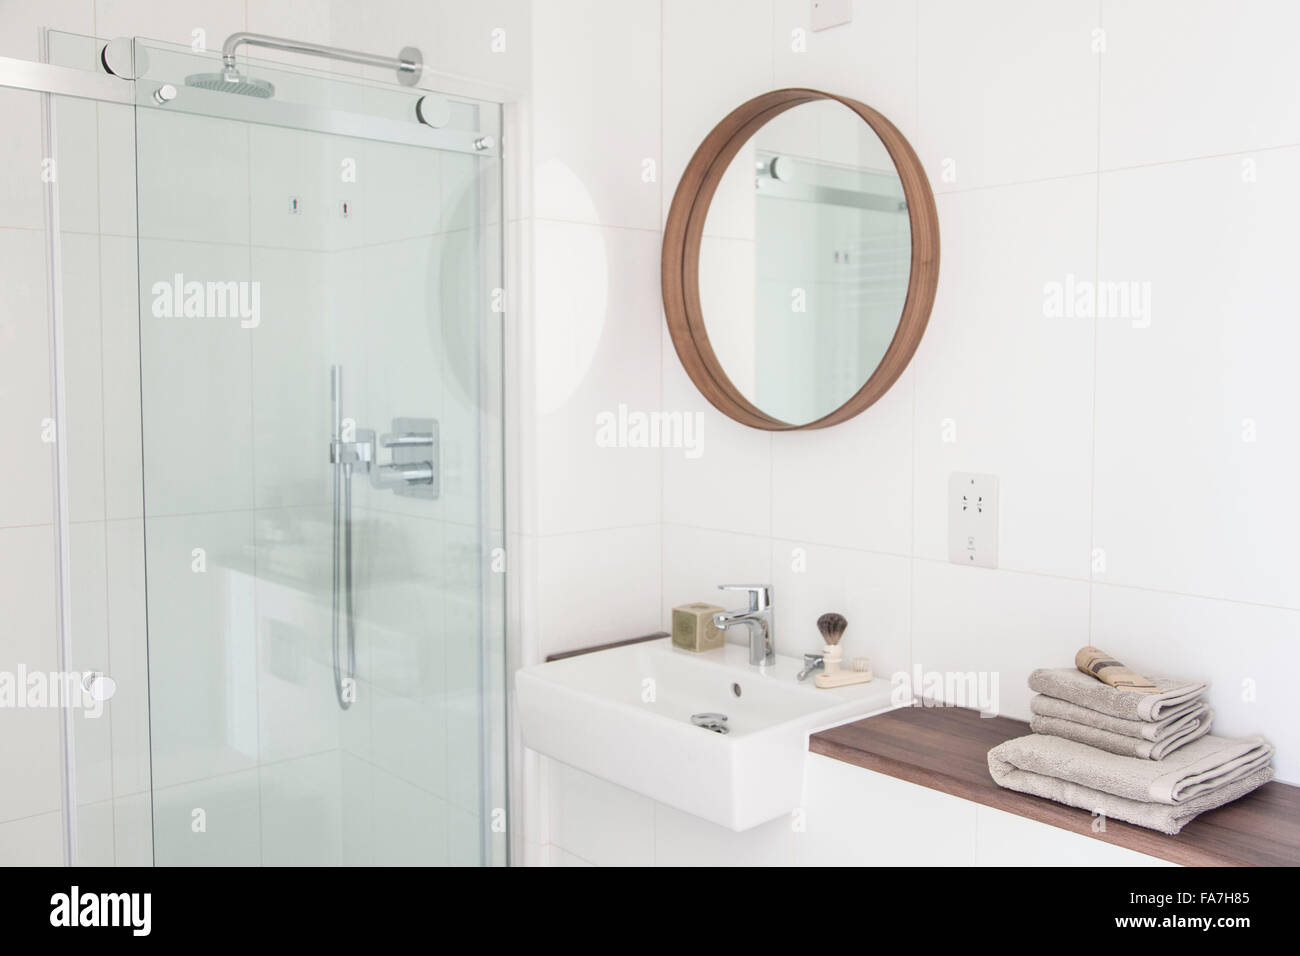 White bathroom in a modern country house in Cambridge. A house combining modern minimalist style with display of traditional objects used in every day life. Stock Photo